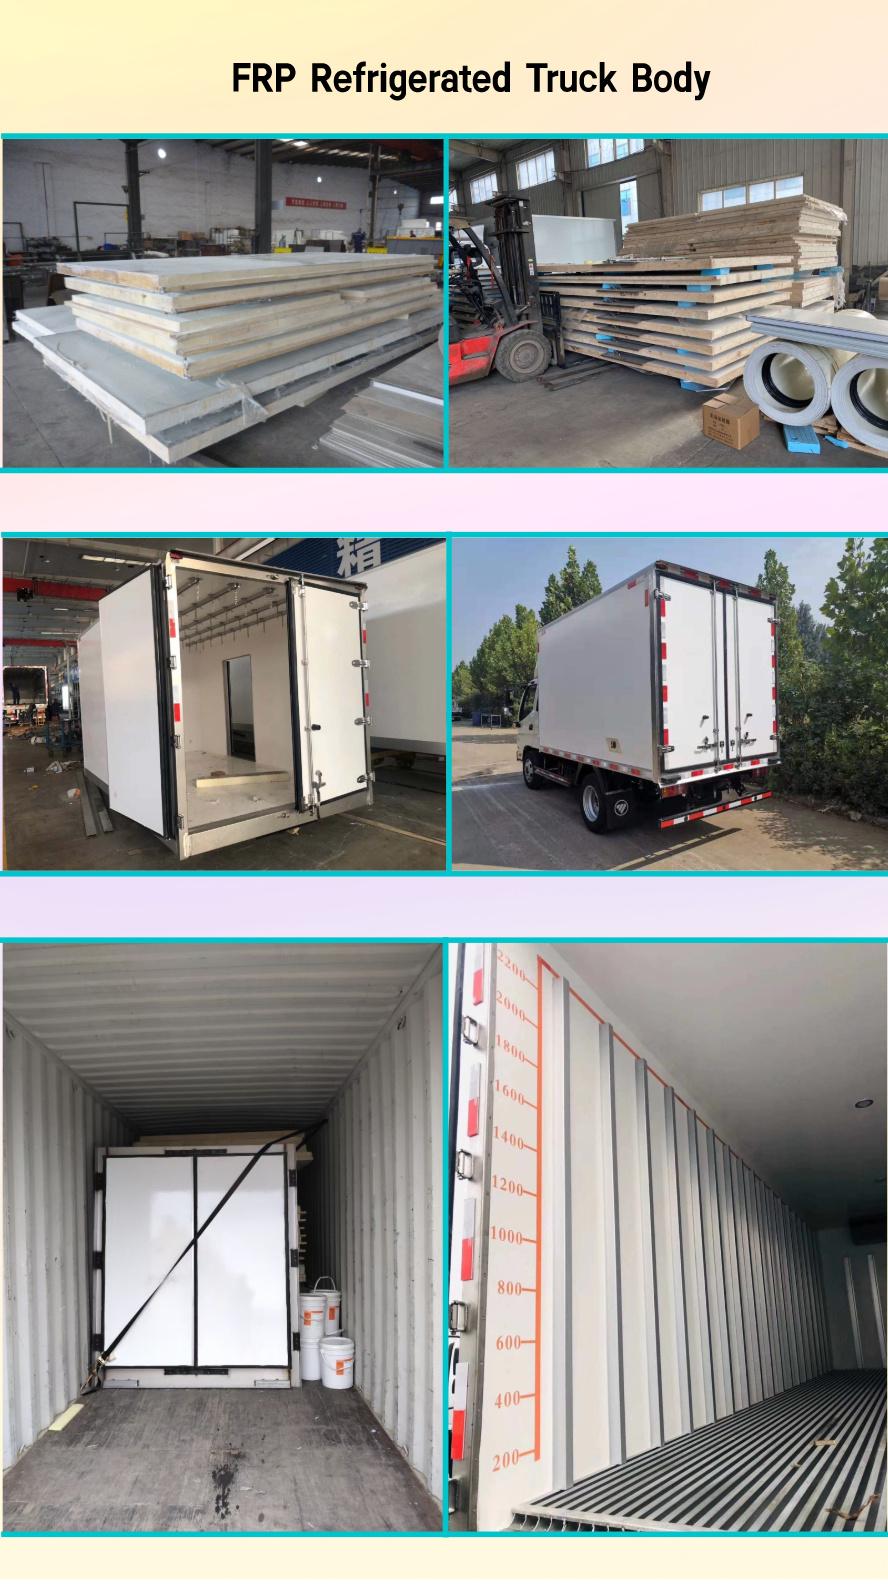 Refrigerated Truck Body with FRP Composite Panel